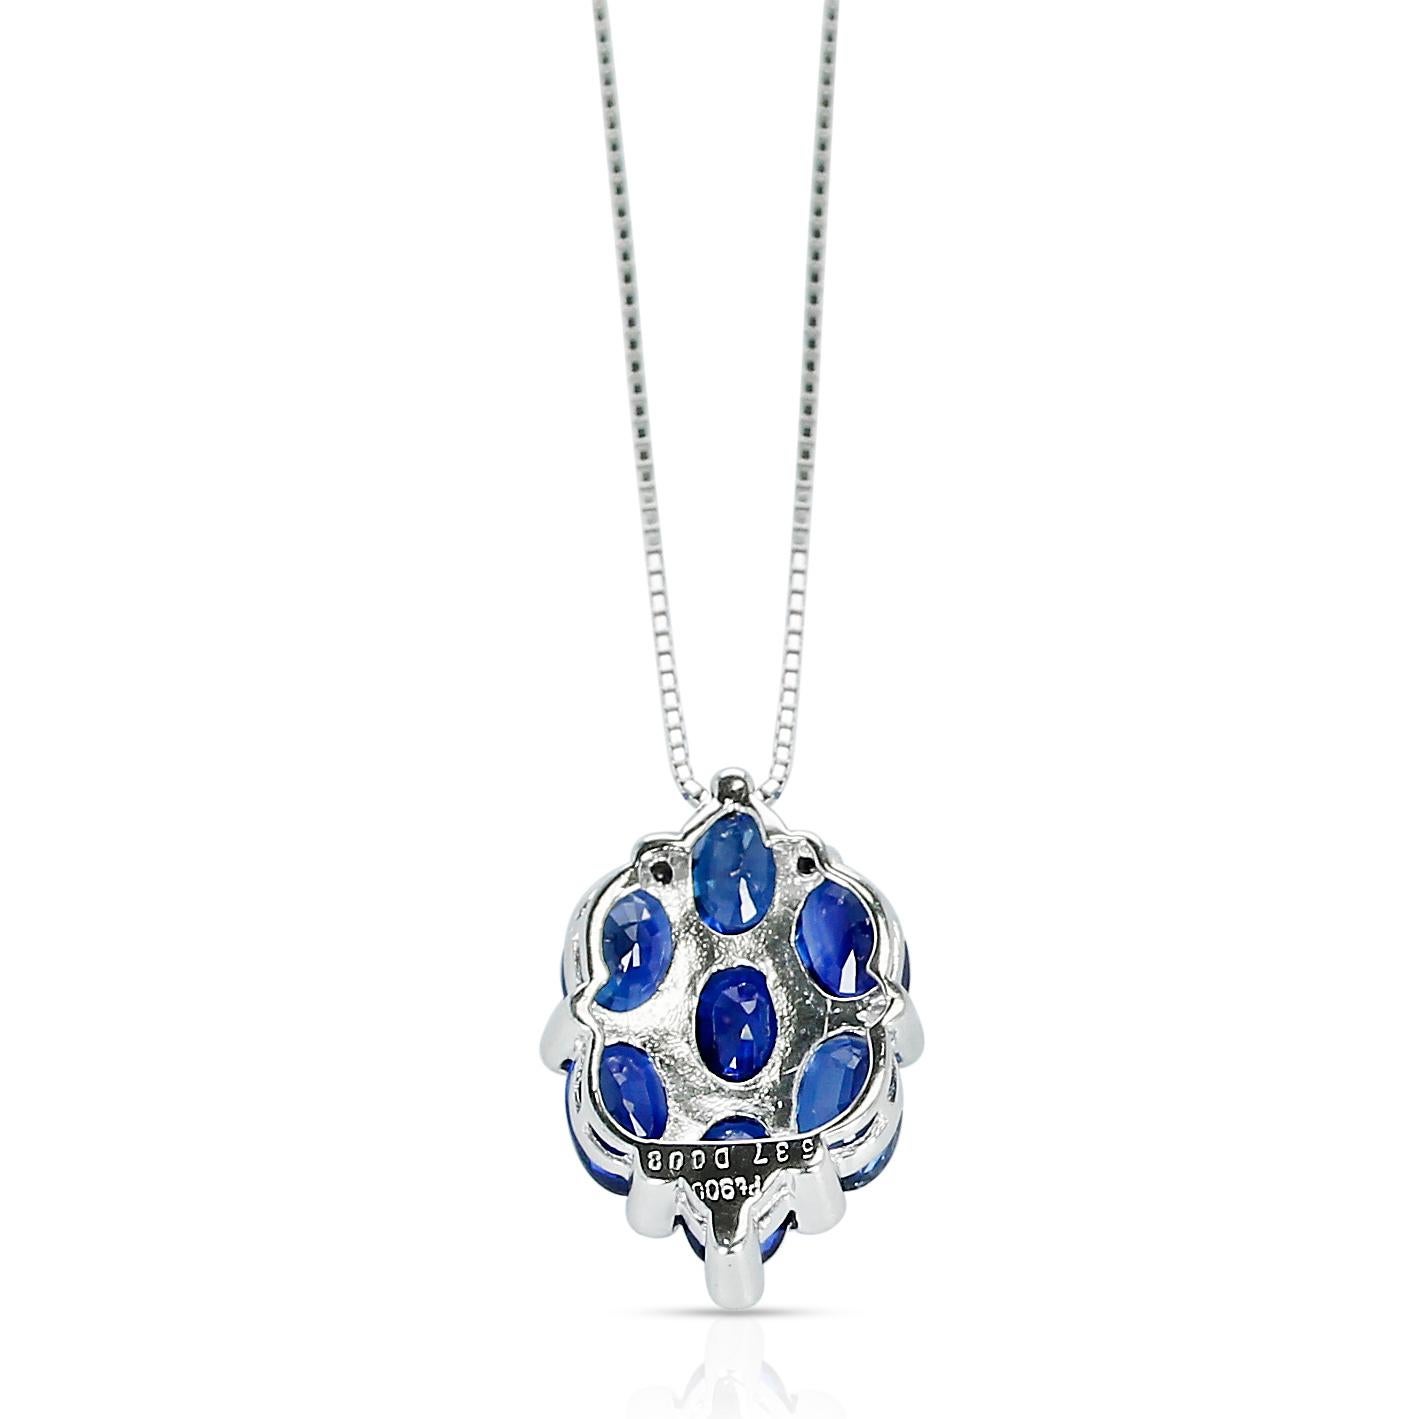 Oval Cut 5.37 Ct. Seven Oval-Shape Blue Sapphire and 0.08 Ct. Diamonds Pendant Necklace For Sale